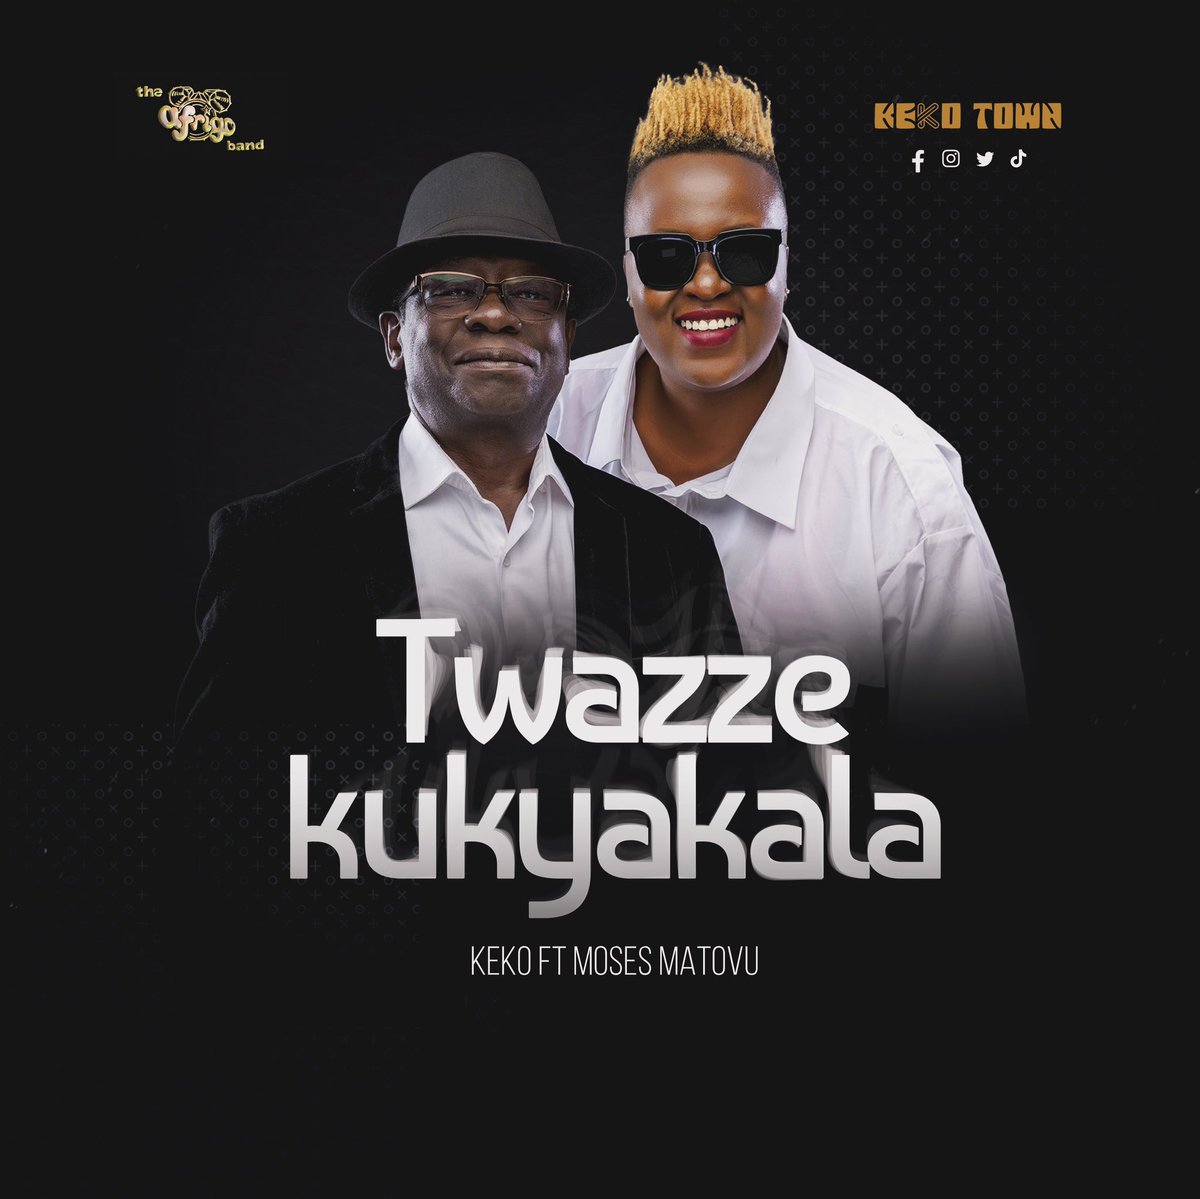 Alright alright! be the 1st to hear it! Twazze kukyakala ft Moses Matovu premieres this Friday 19th at 14:00hrs on YouTube. Like share and subscribe. Merci 👇🏾 youtu.be/j4t5ADUtvIU?si…